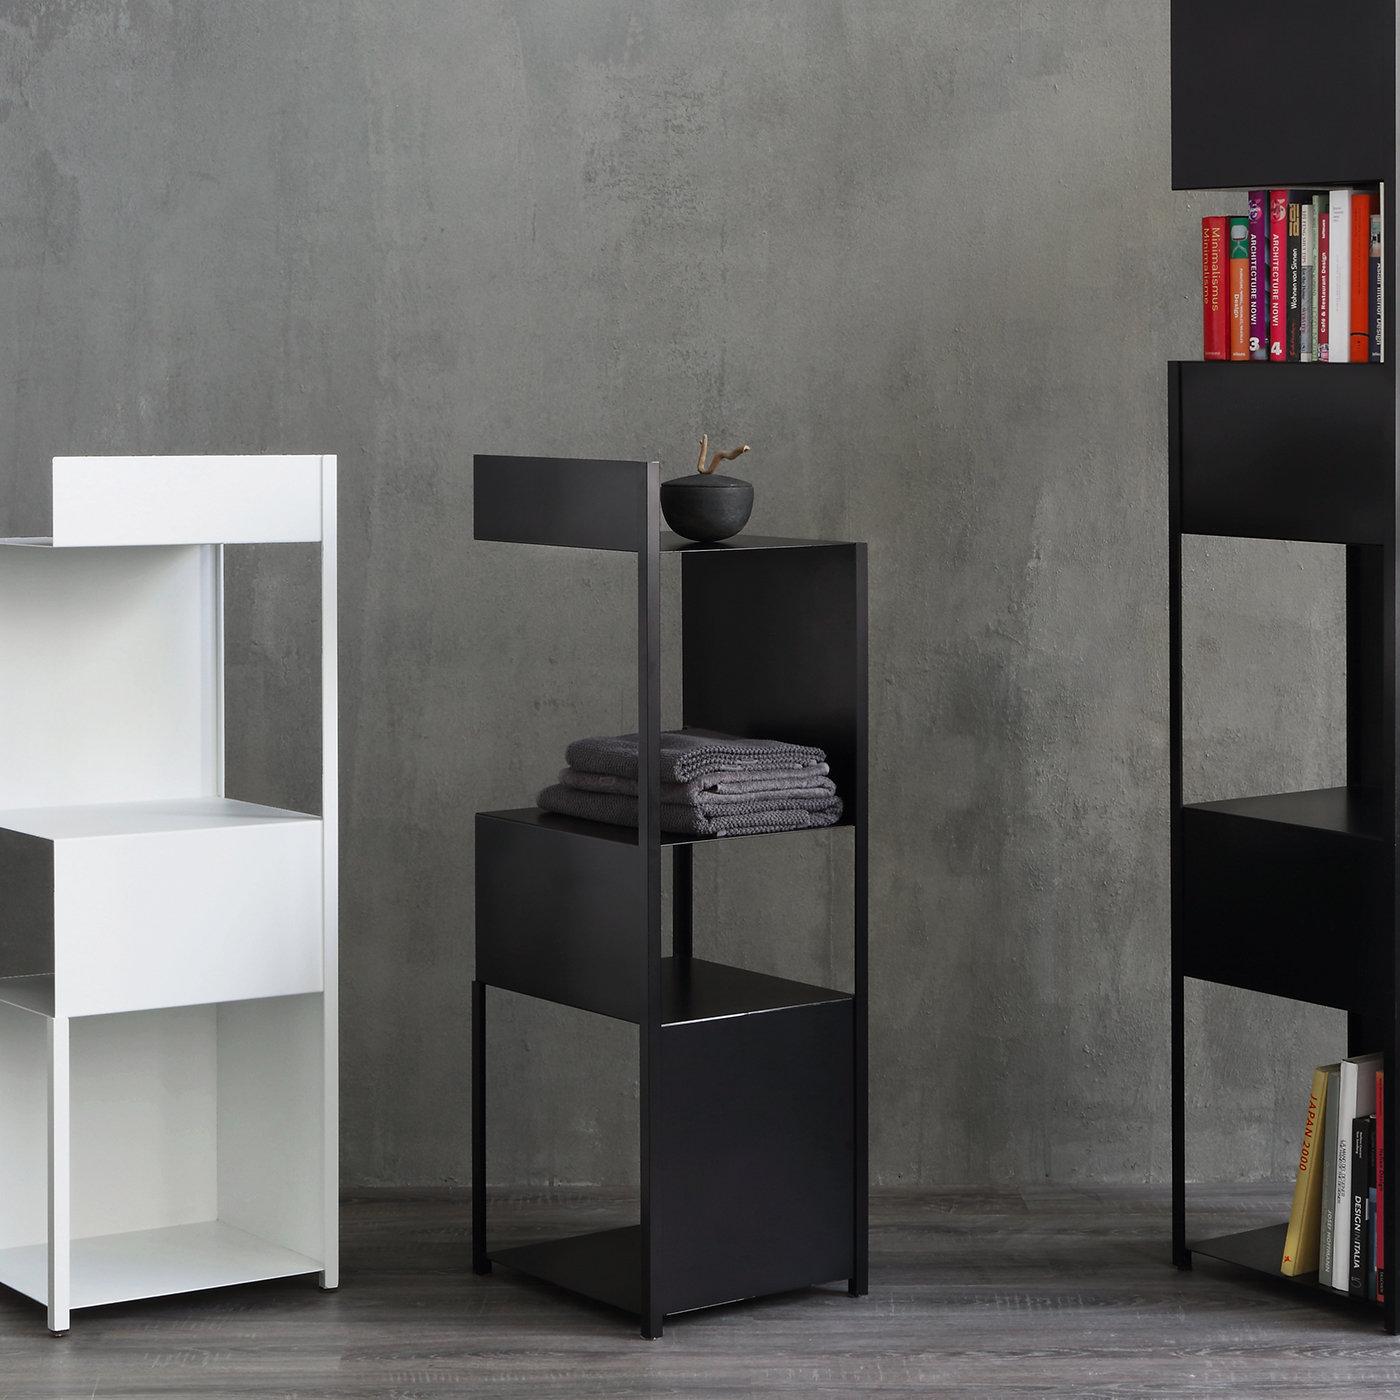 From a collection of essential contemporary designs, the Tito Shelves offer an original display for books, plants and photos. Playing with empty spaces, the shelves open up on all four sides, allowing you to show off three-dimensional objects from